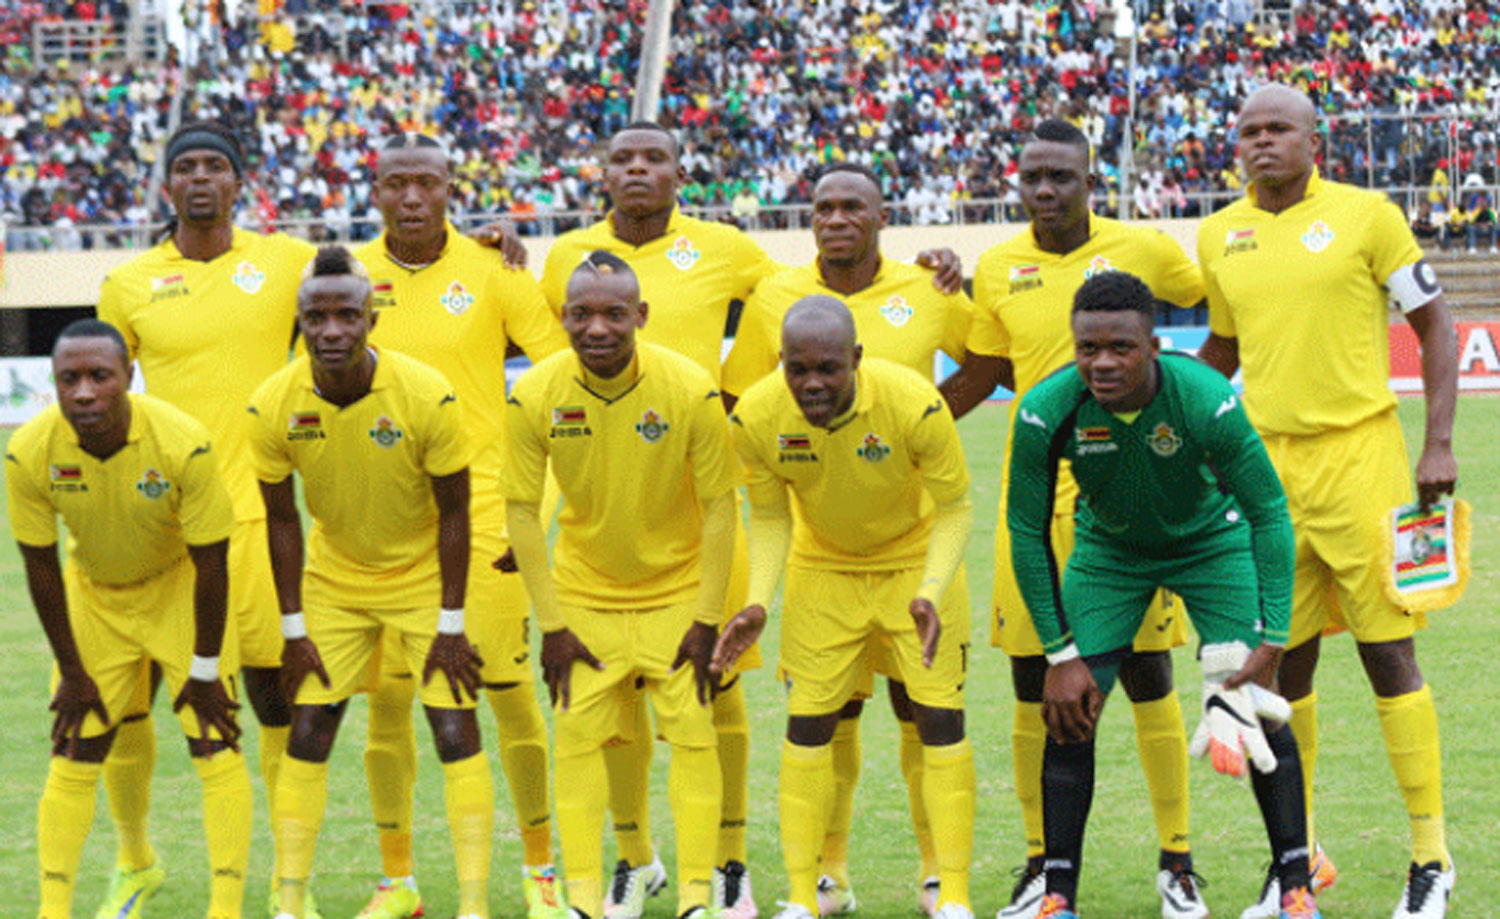 Preview+South+Africa+vs+Zimbabwe%3A+FIFA+World+Cup+qualifying+match